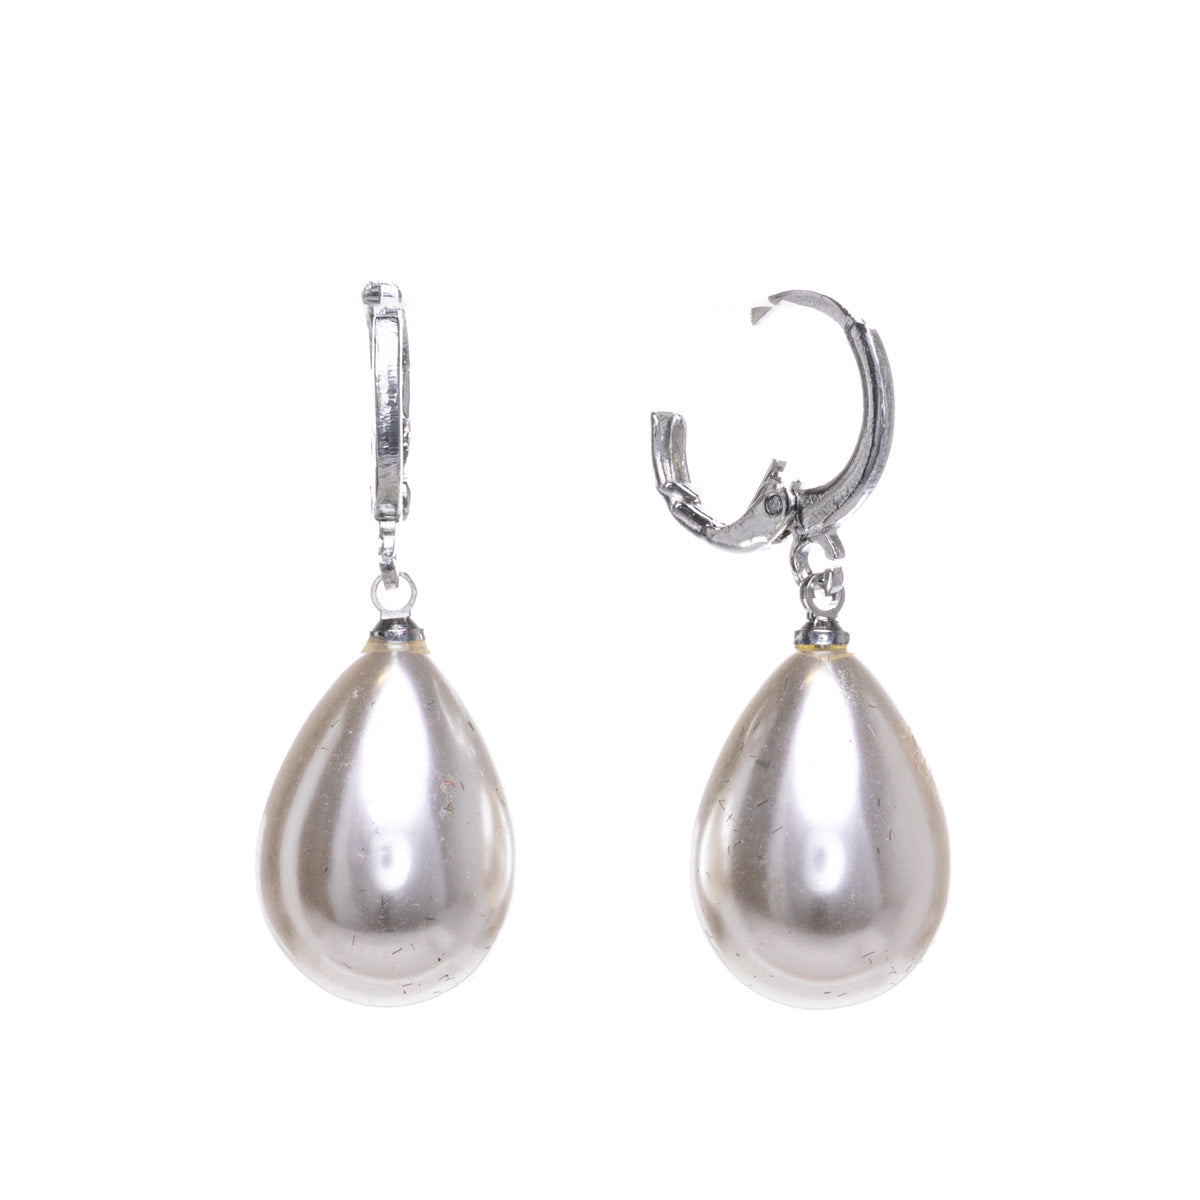 Droplet-shaped pearl earrings hanging from a ring